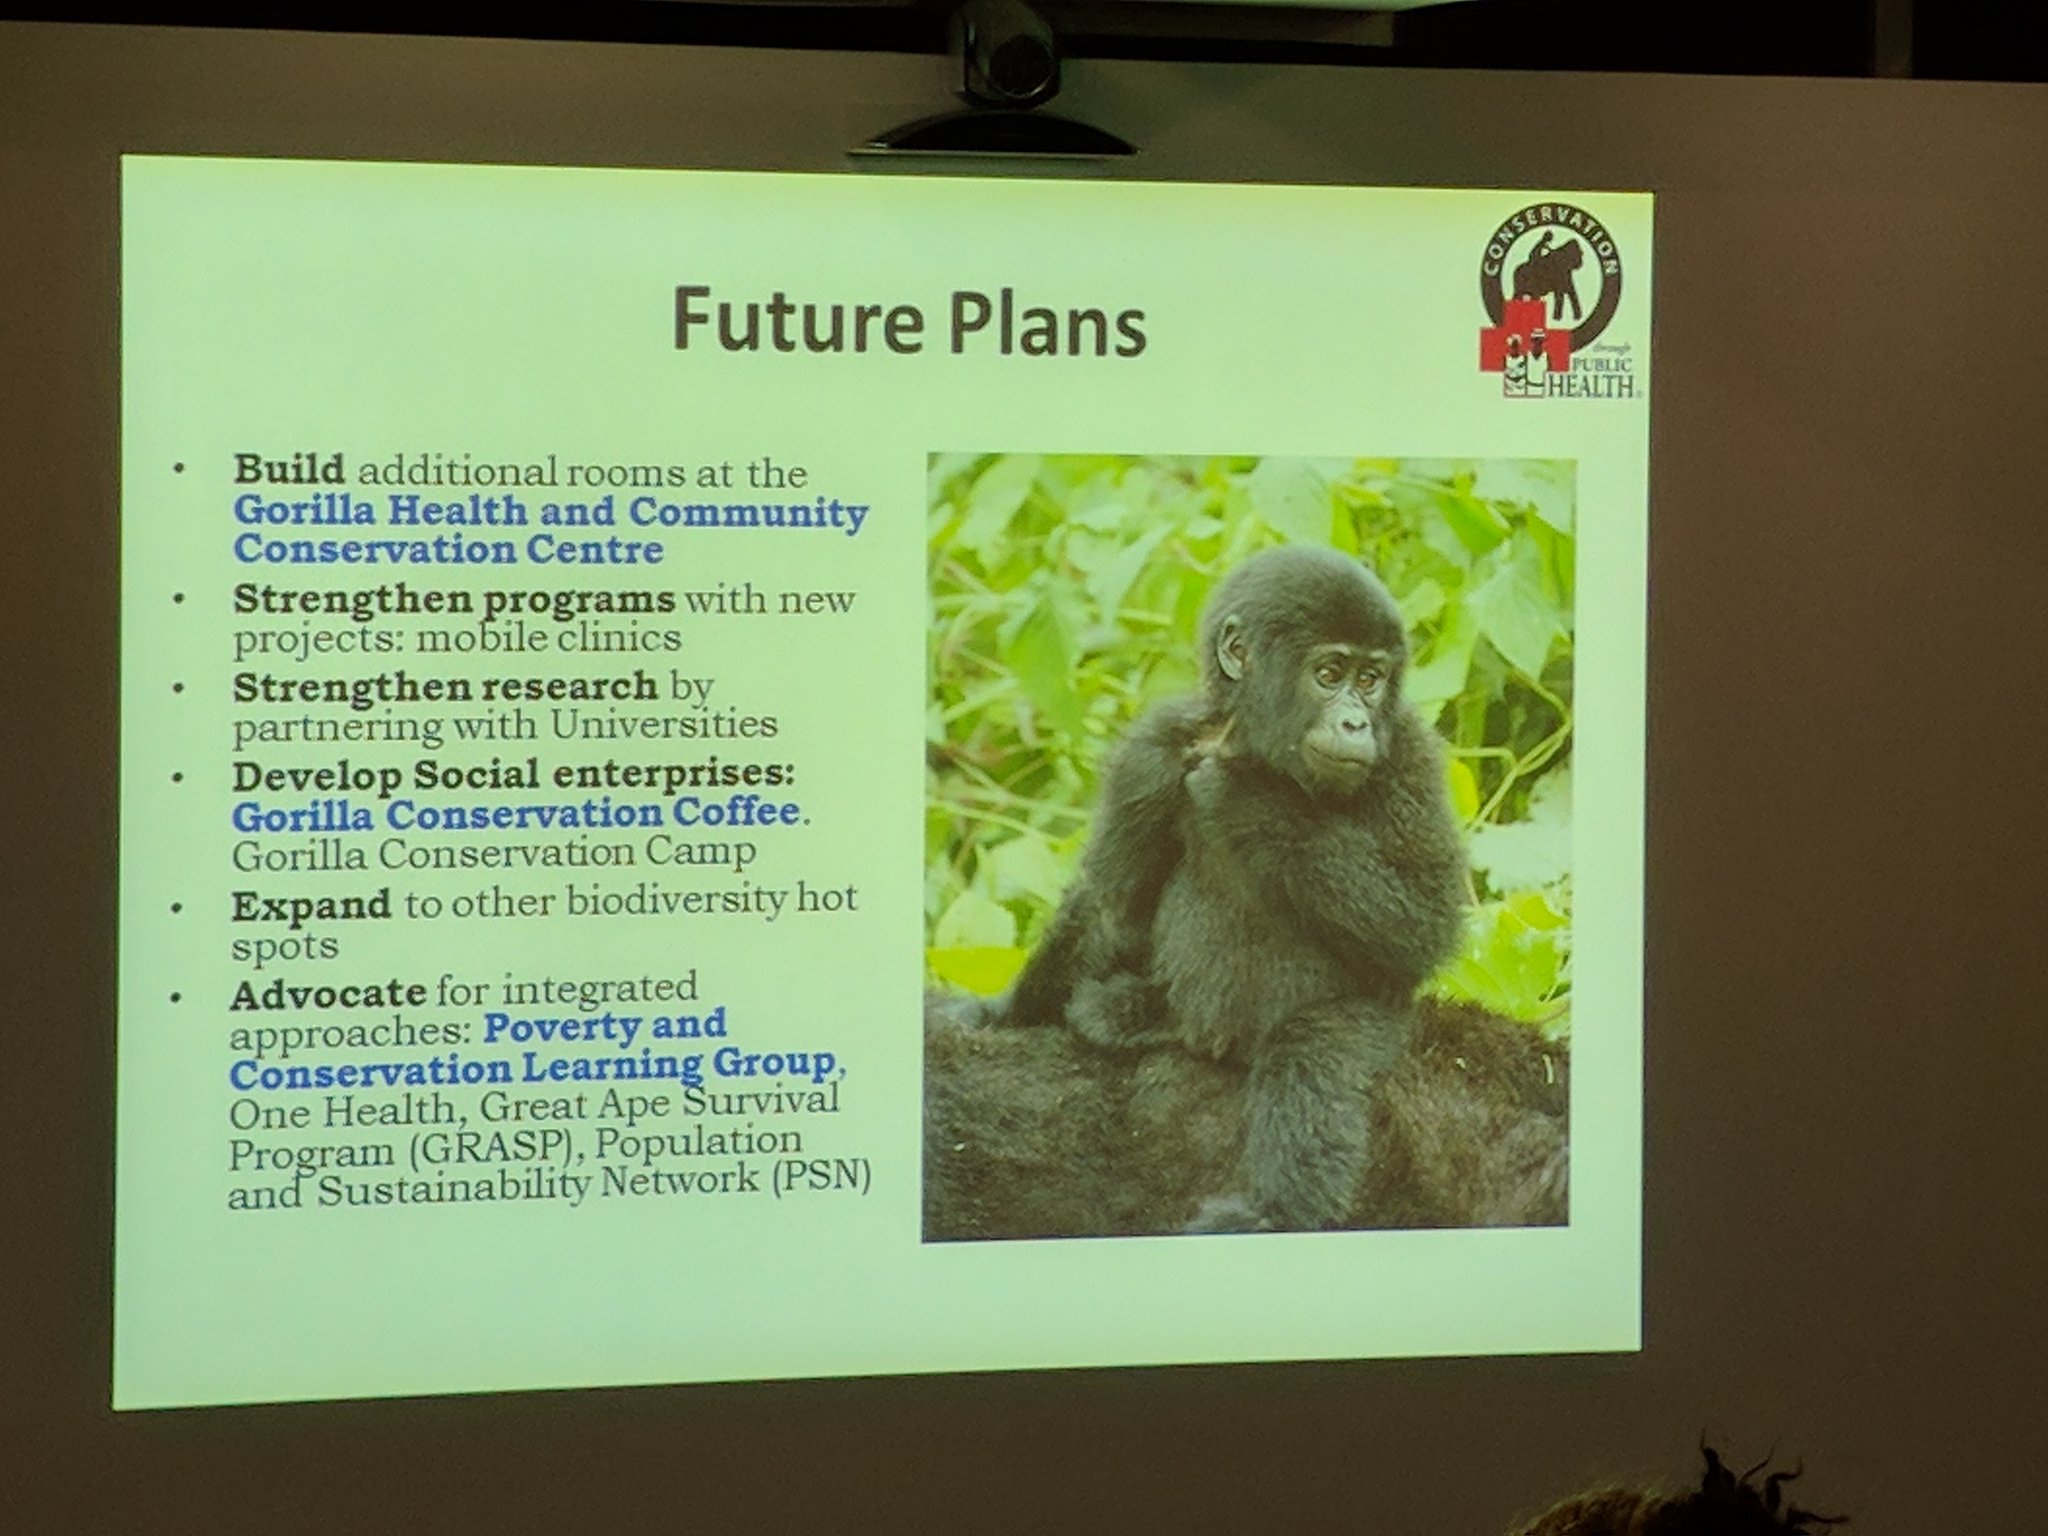 @CTPHuganda have big plans for their projects on health & conservation at #Bwindi https://t.co/jGSJ1JkX8H